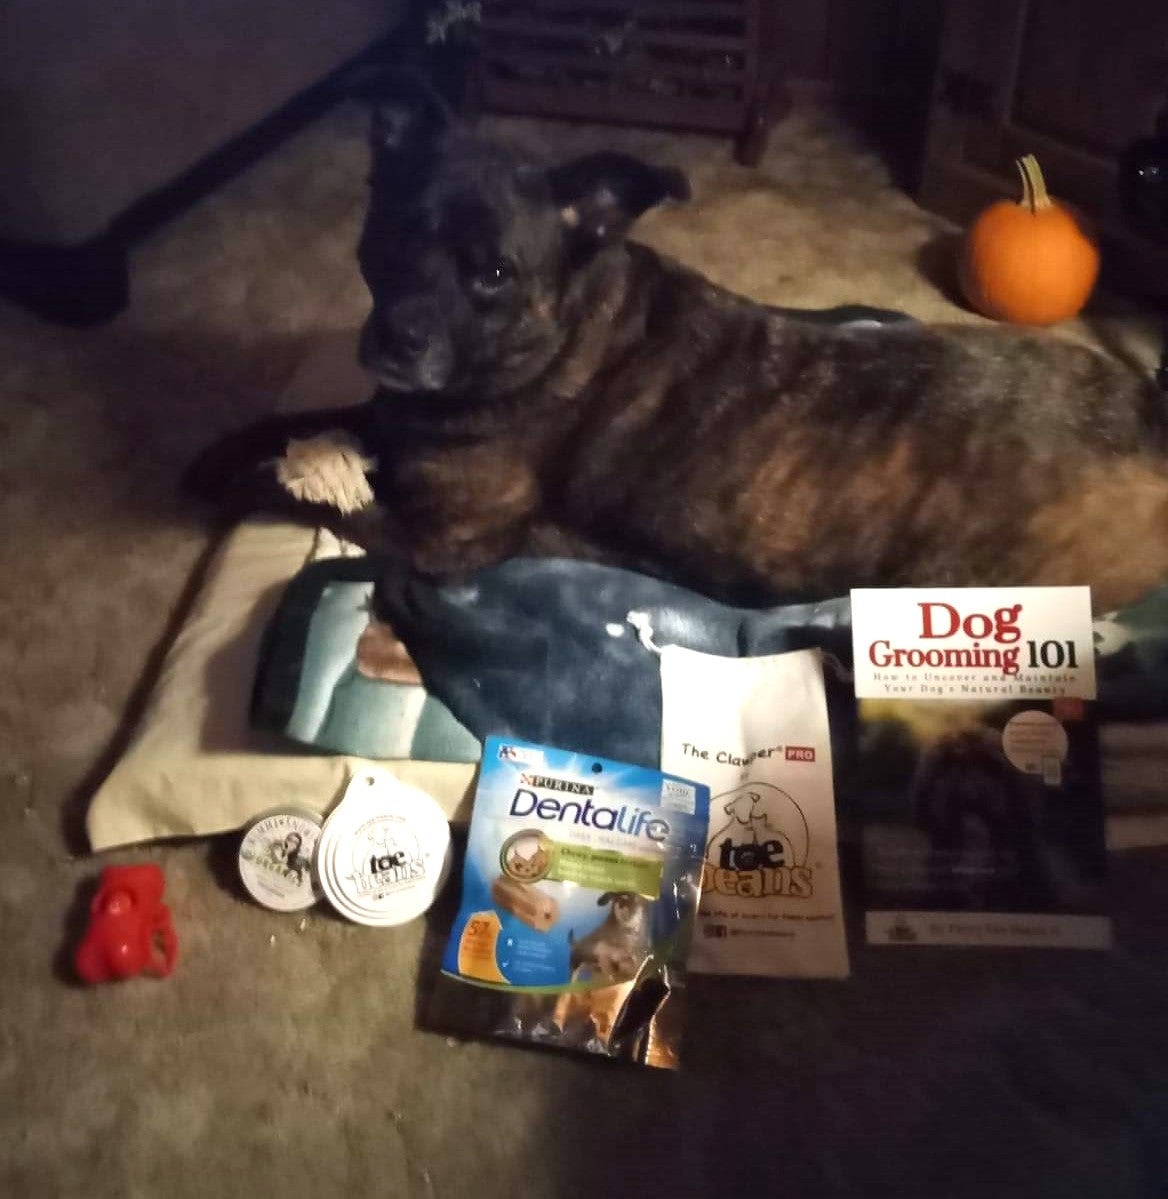 Rhonda's dog Colby and their prizes